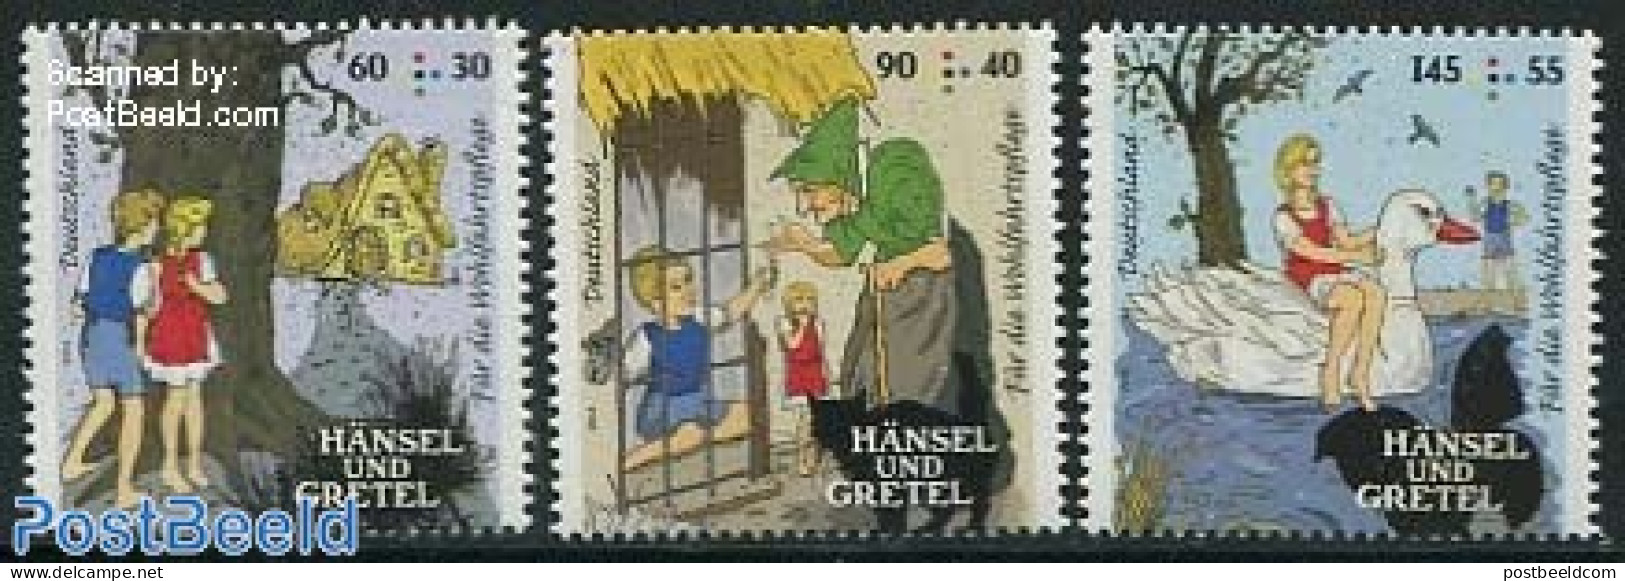 Germany, Federal Republic 2014 Welfare, Hansel And Gretel 3v, Mint NH, Art - Fairytales - Unused Stamps